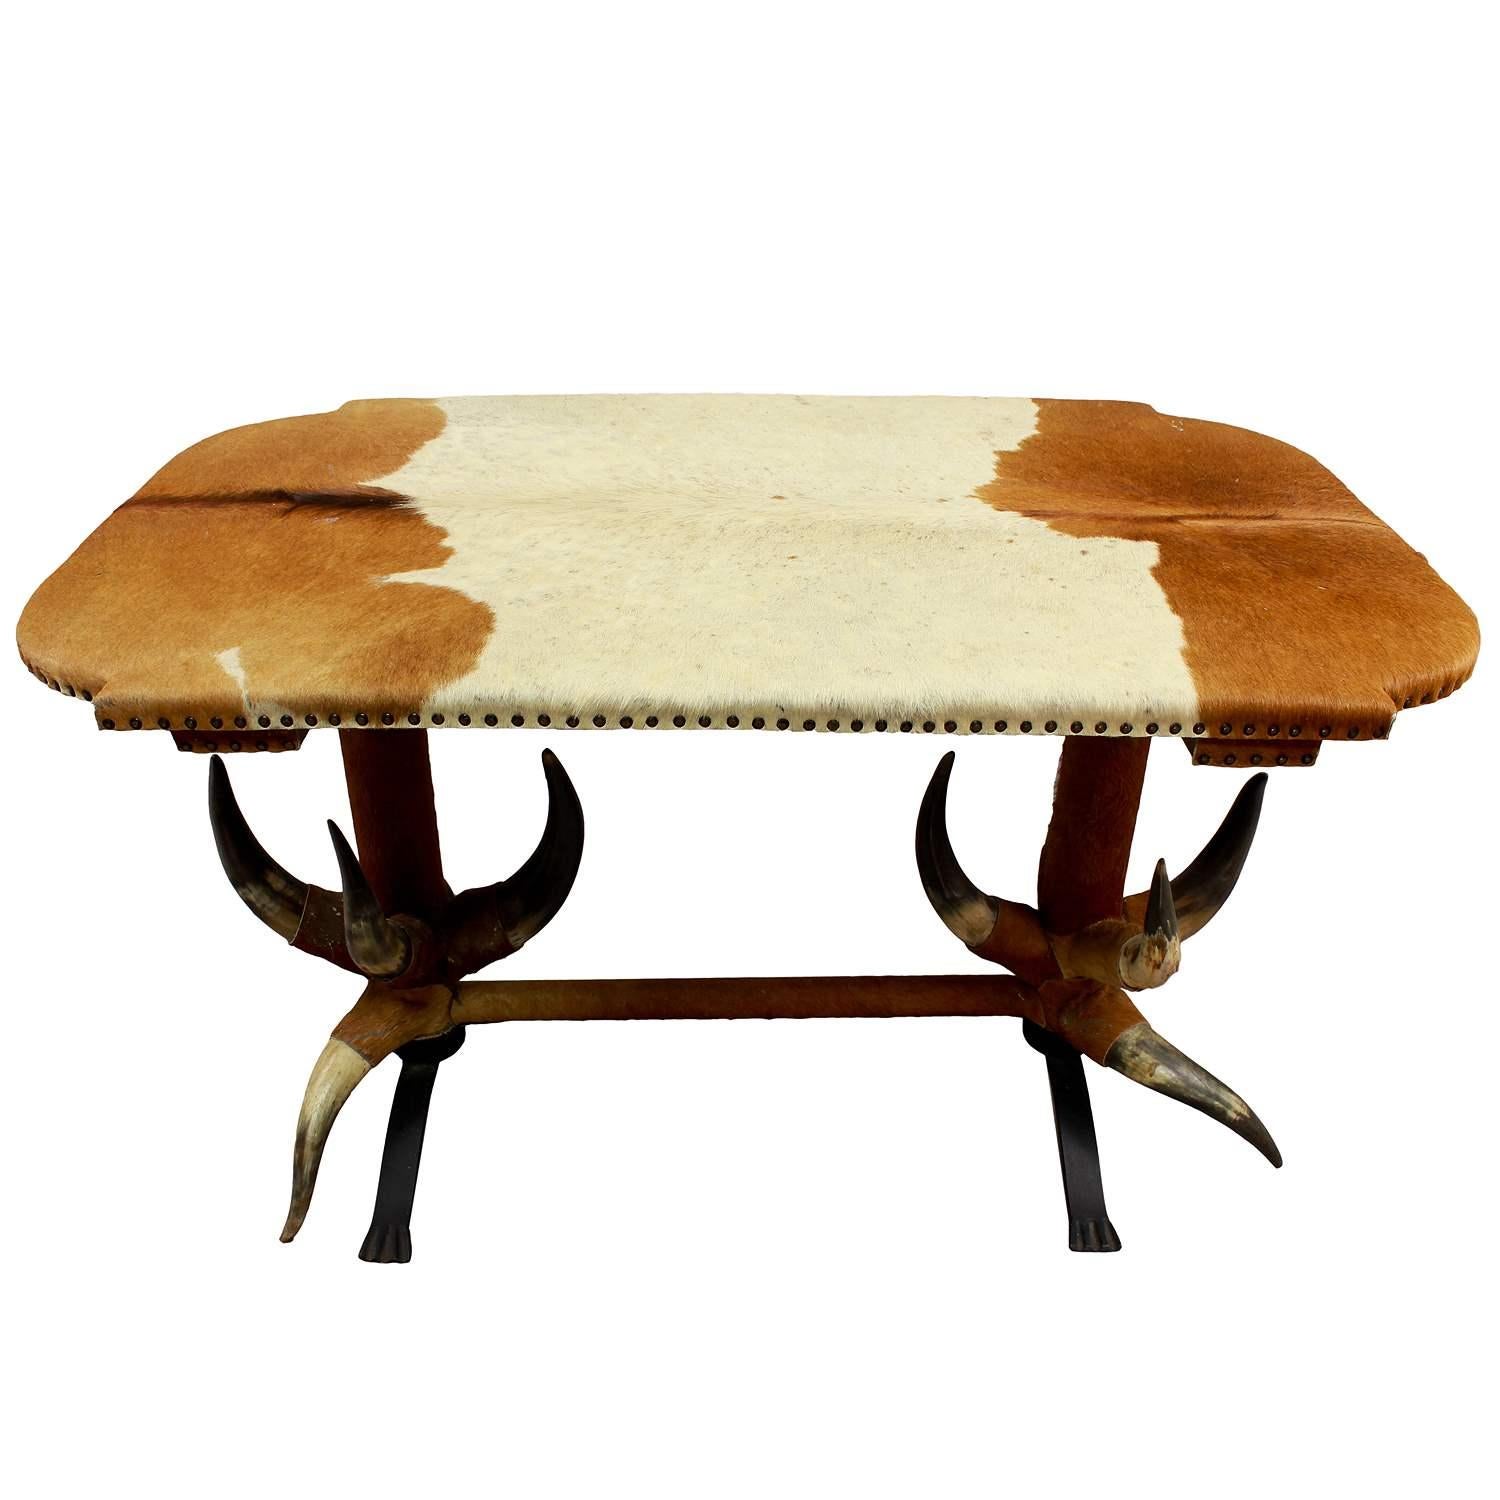 Antique bull Horn table ca. 1870

The bull horn table is covered with vintage cattle coat which has to be renewed (is loosing the hairs). The iron legs are added to improve stability. It was manufactured in Austria ca. 1870.

Antler furniture have